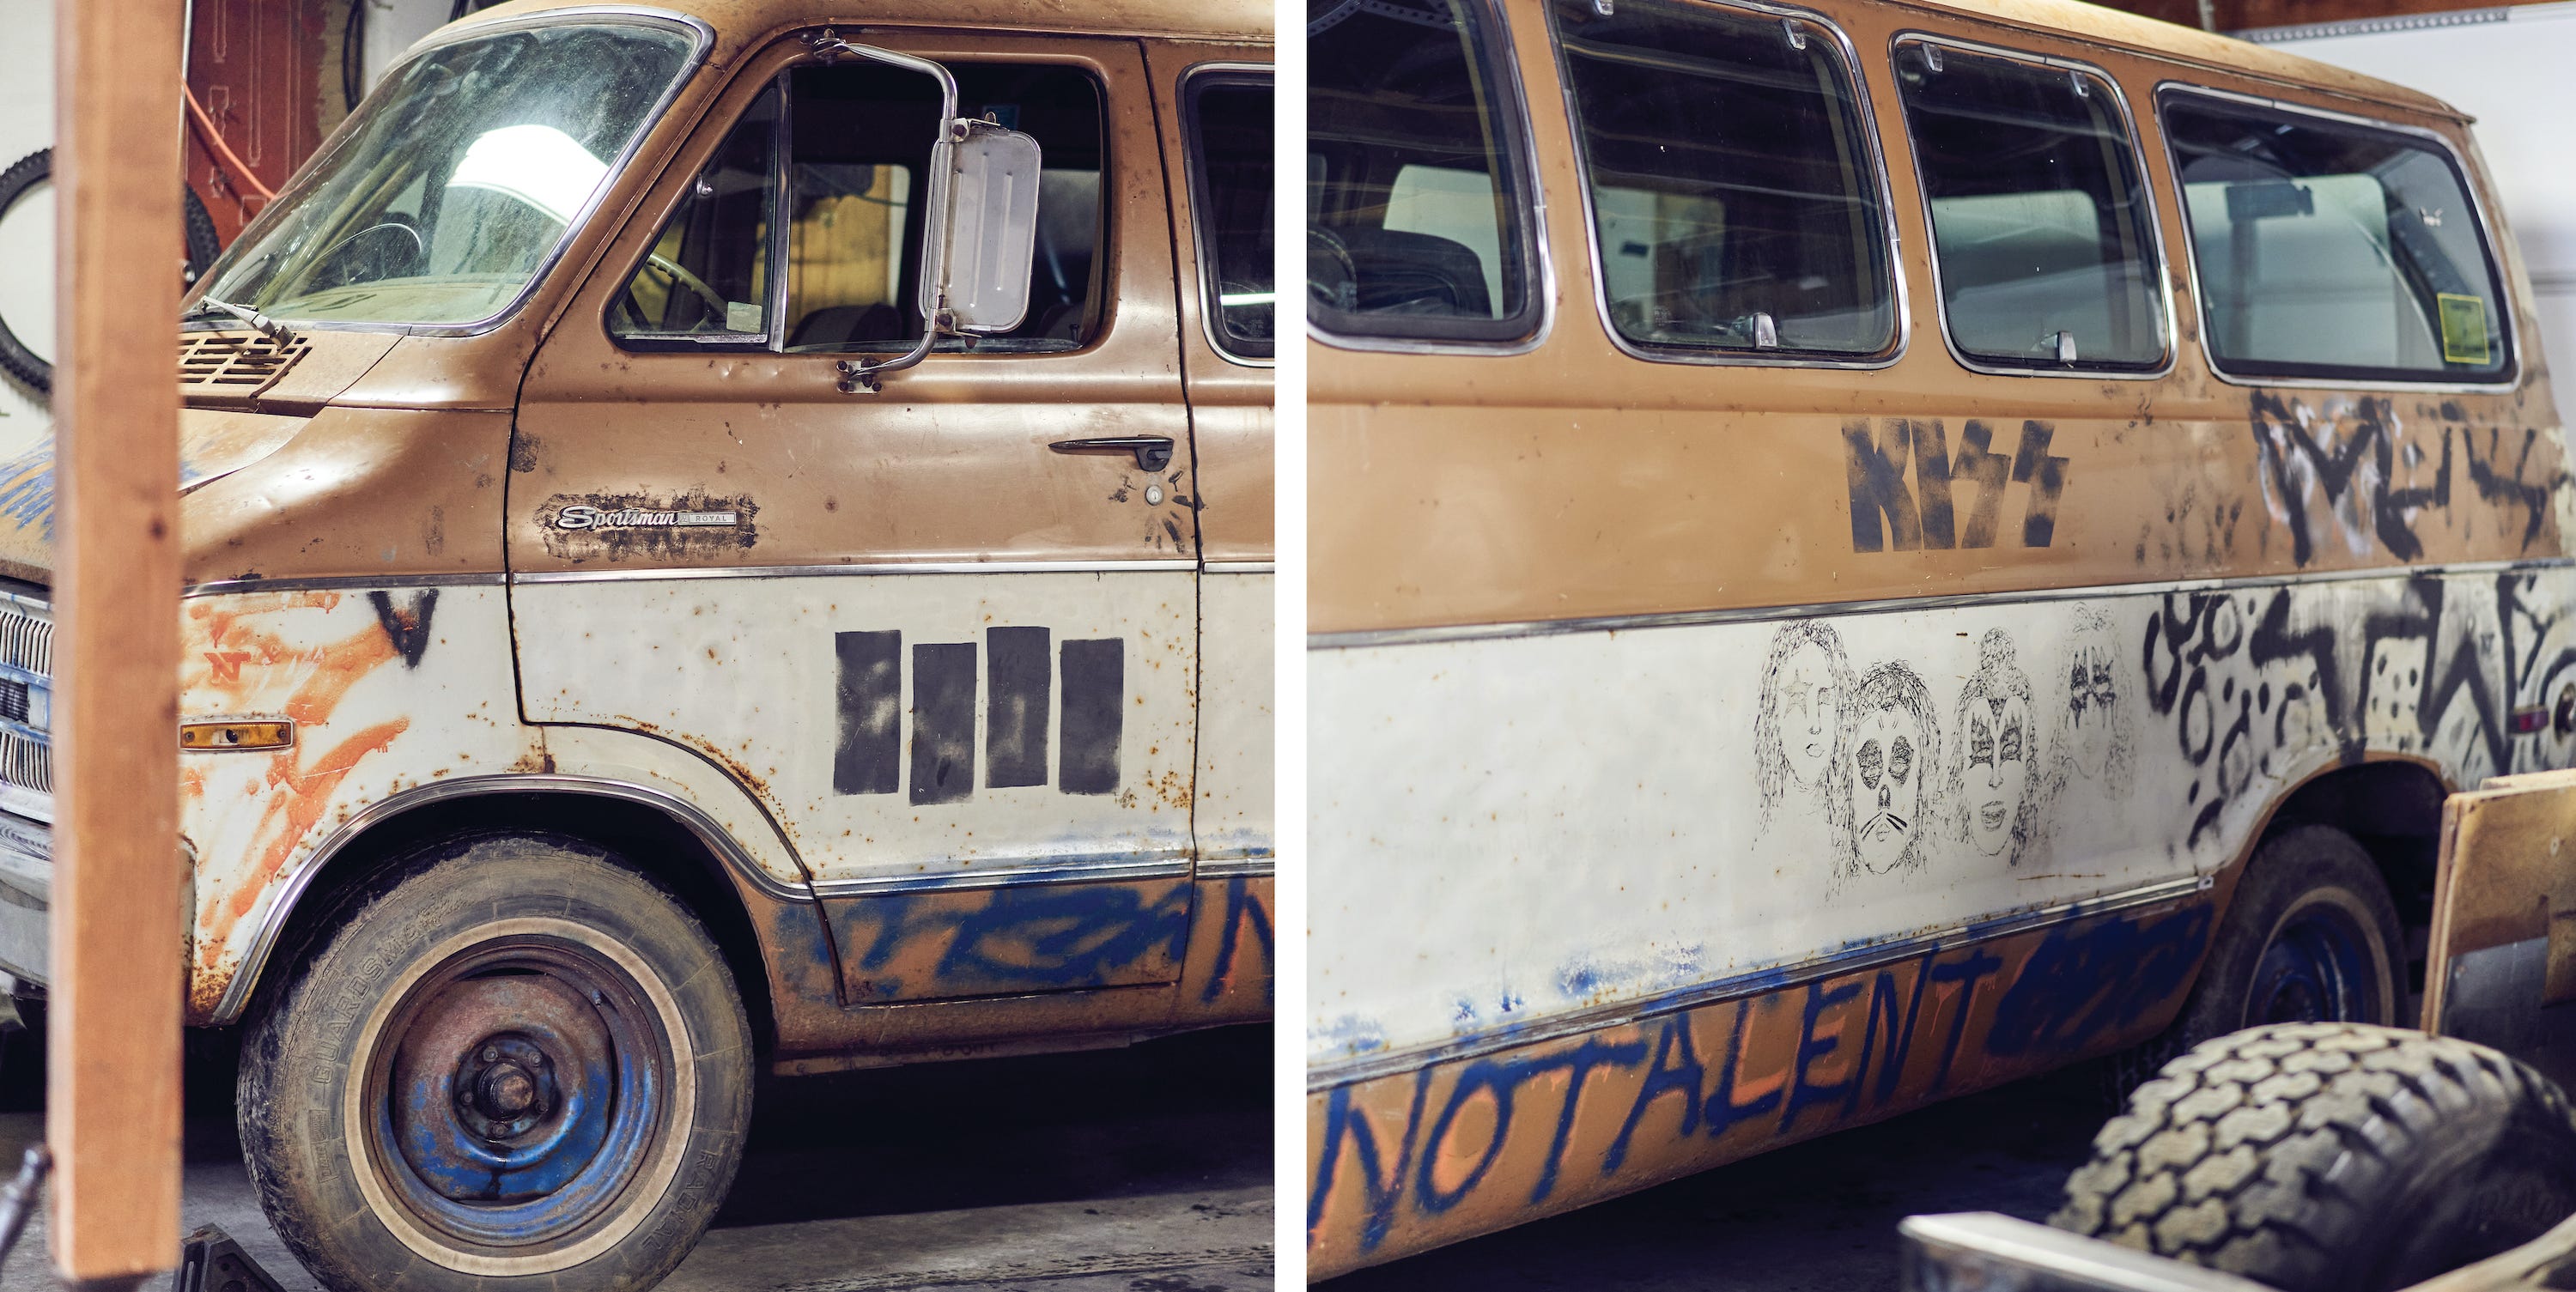 The Kurt Cobain Decorated Melvan Is the Archetypal Tour Van, in All its Filthy Charm